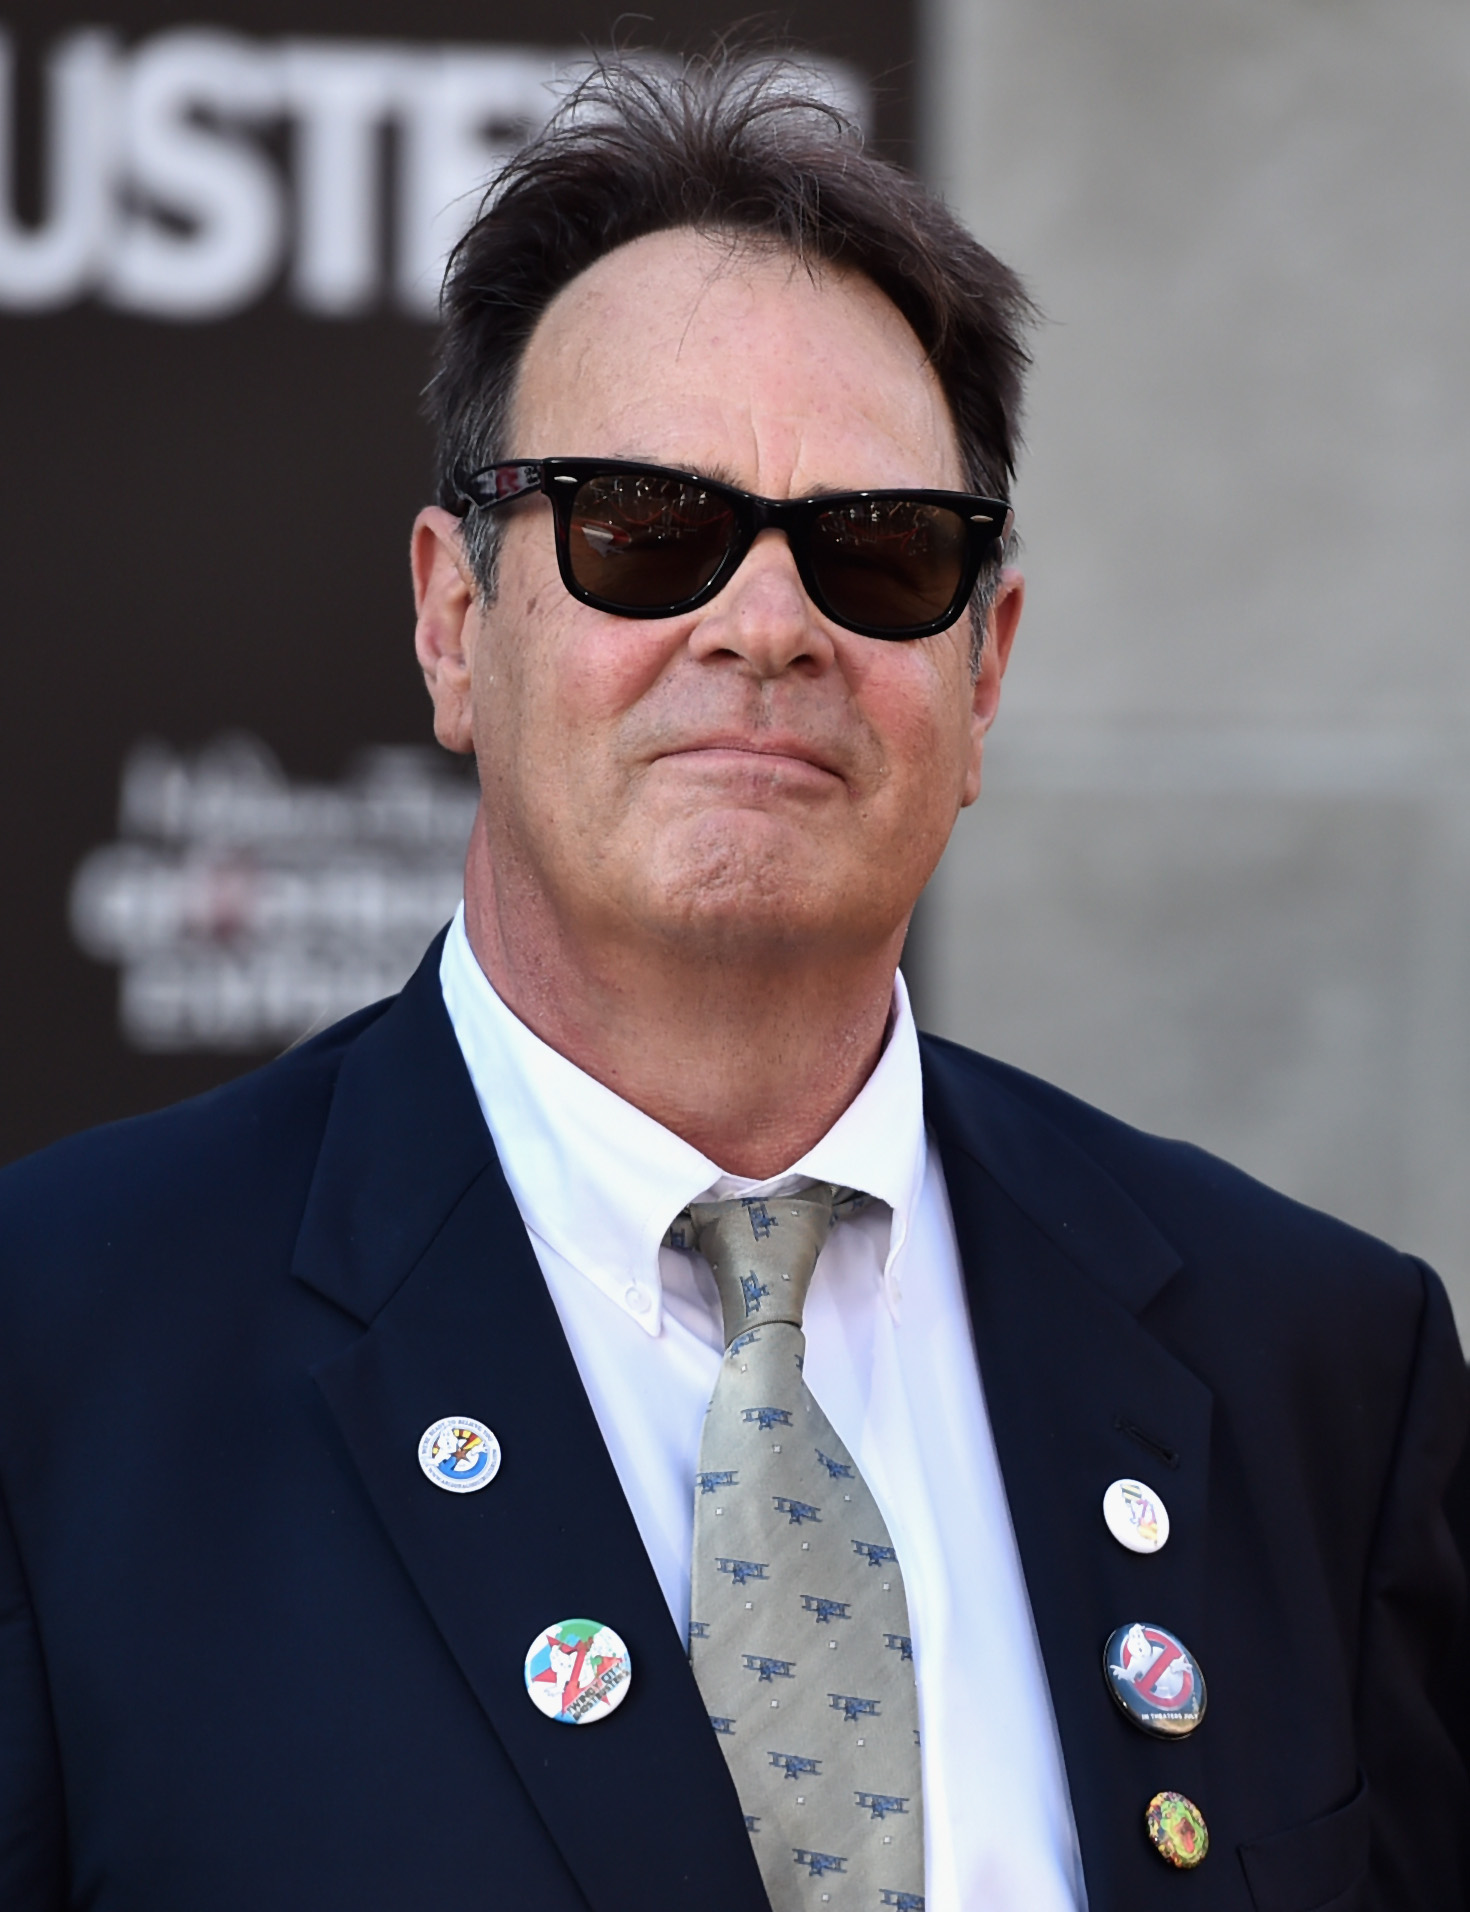 Actor Dan Aykroyd arrives at the Premiere of Sony Pictures' 'Ghostbusters' at TCL Chinese Theatre on July 9, 2016 in Hollywood, California.